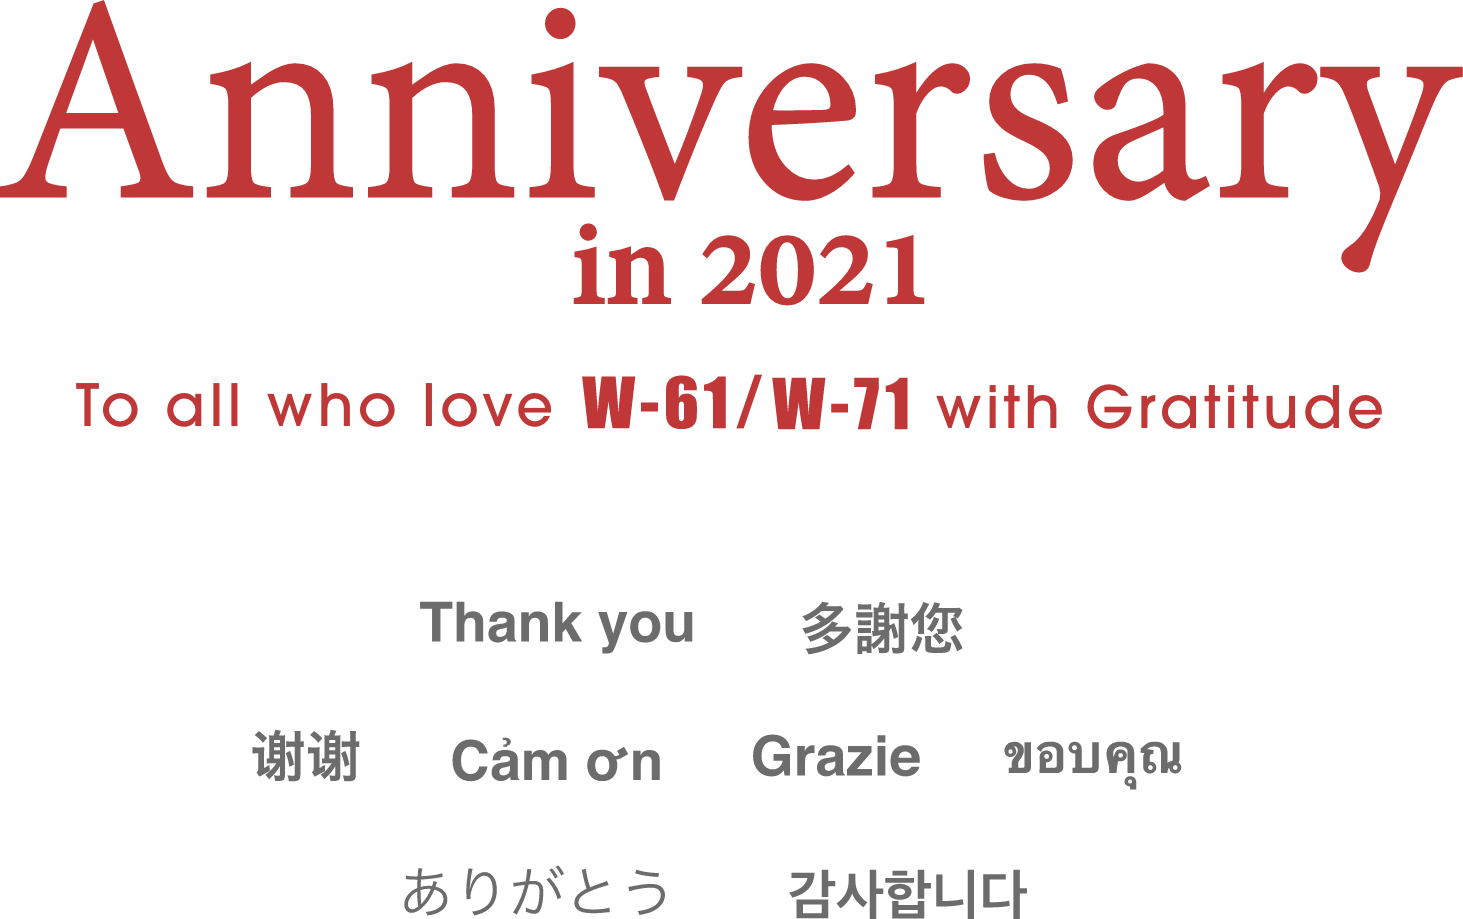 Anniversary in 2021. To all who love W-61/W-71 with Gratitude